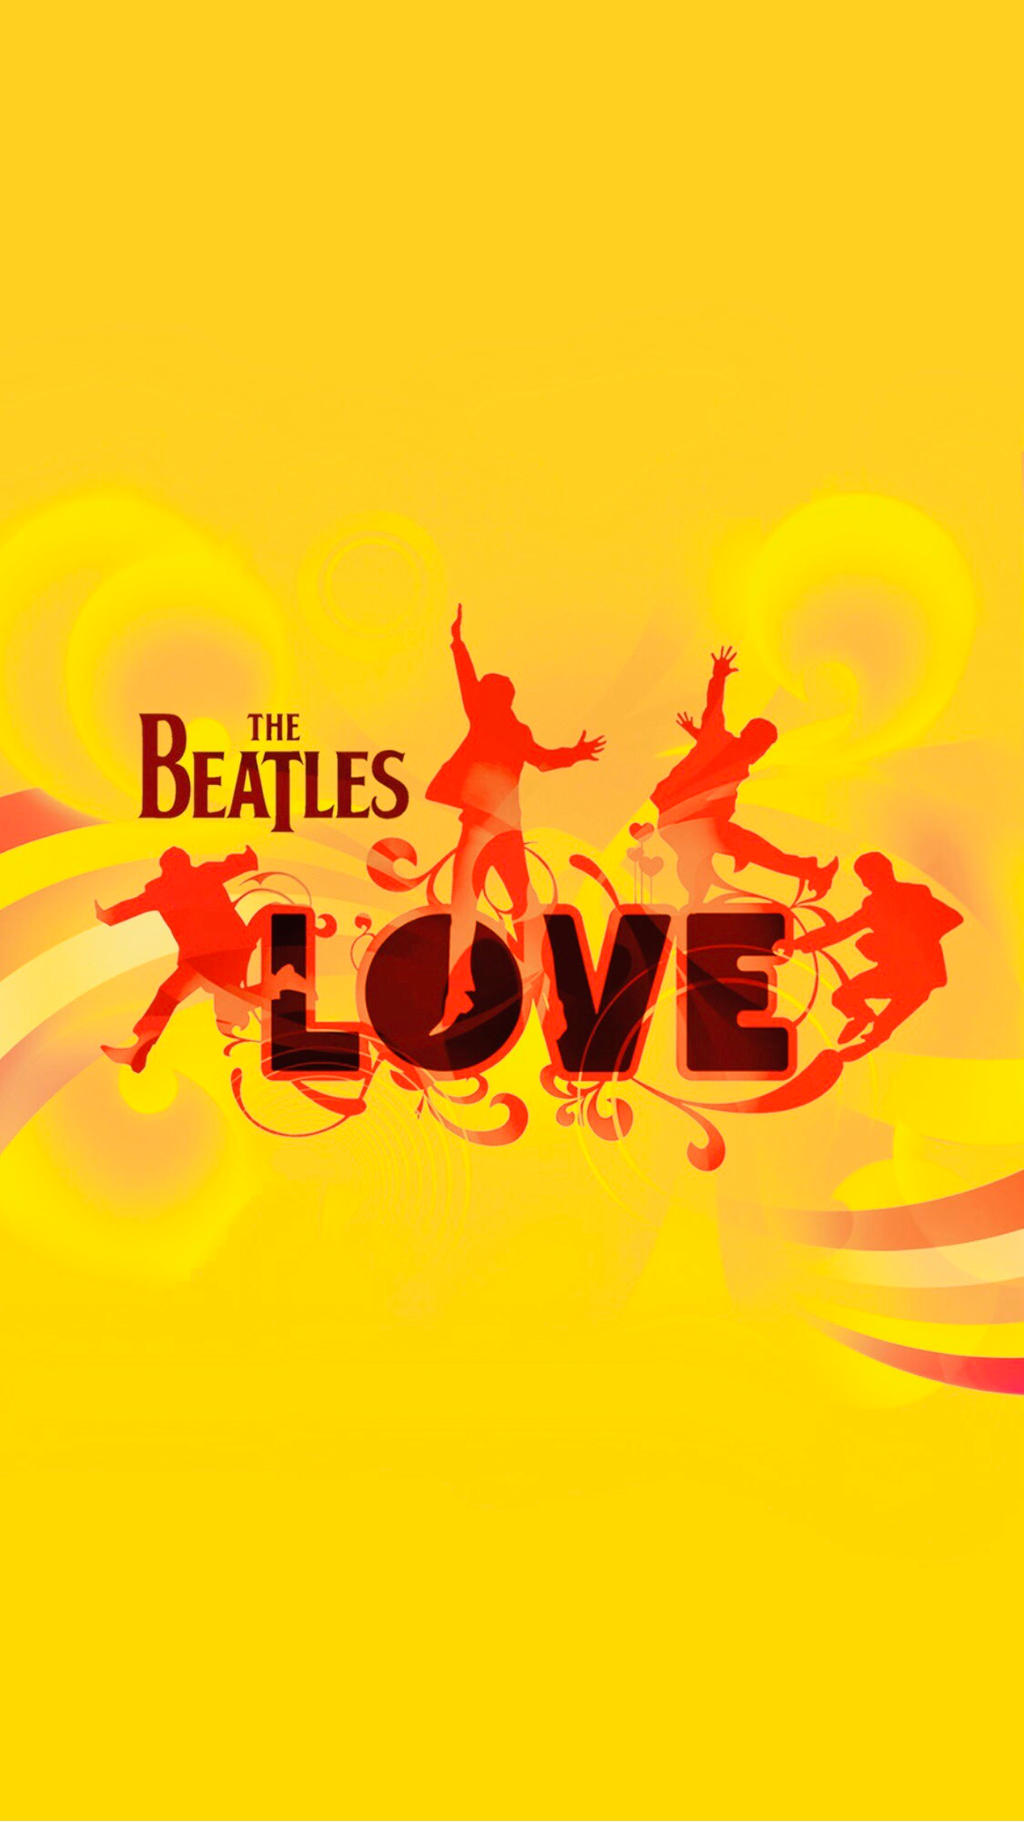 Love Wallpaper For Iphone Android The Beatles By Aquatheinkling05 On Deviantart